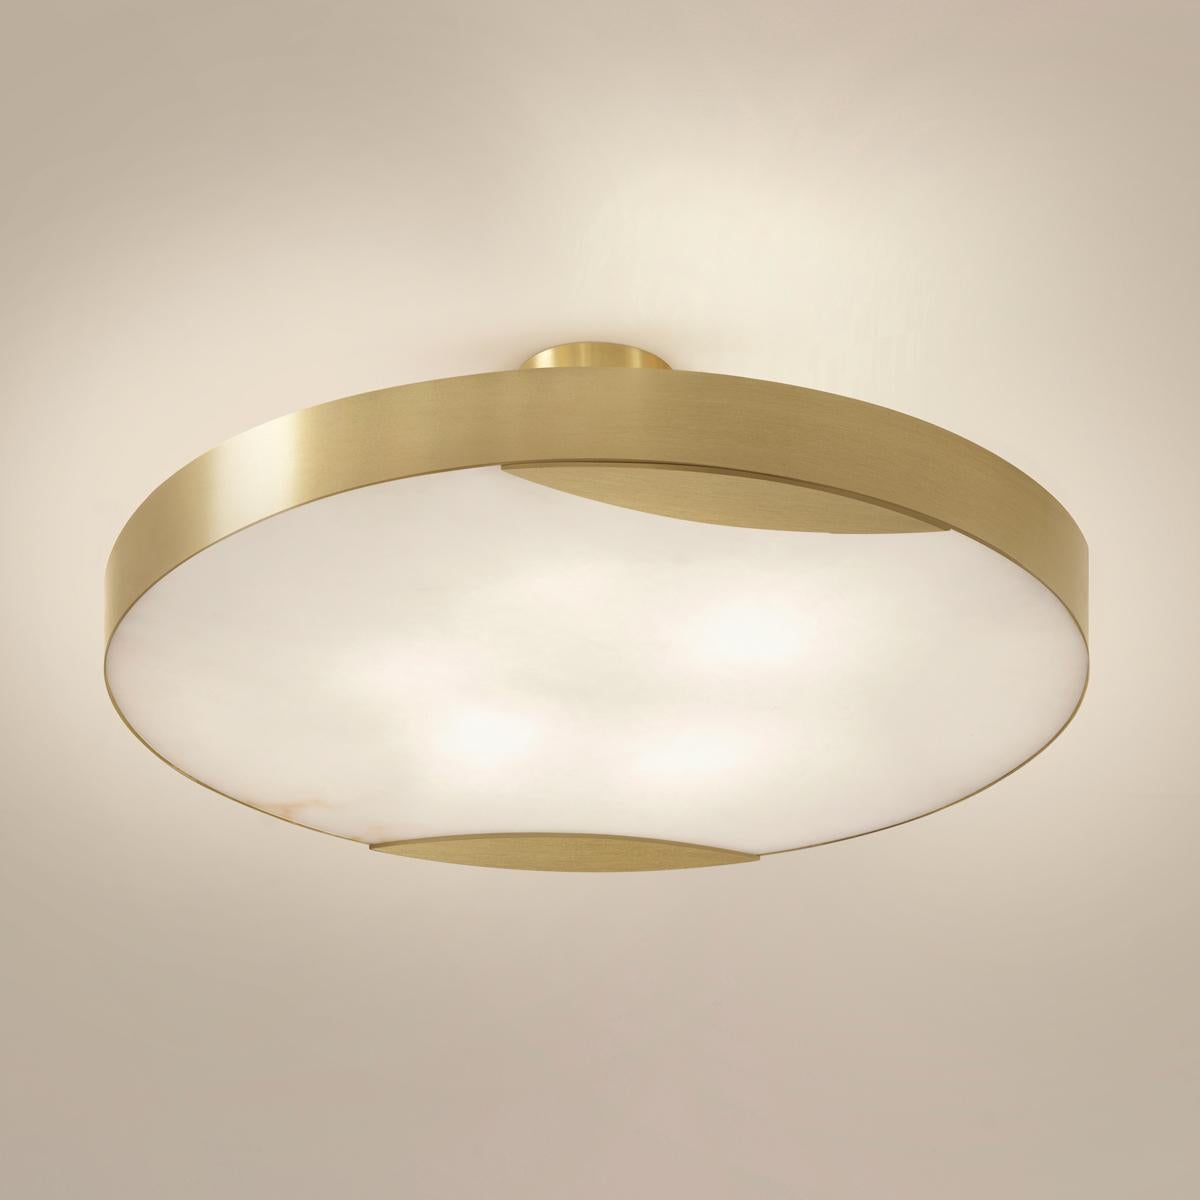 Cloud N.1 Ceiling Light by Gaspare Asaro-Peltro Finish In New Condition For Sale In New York, NY